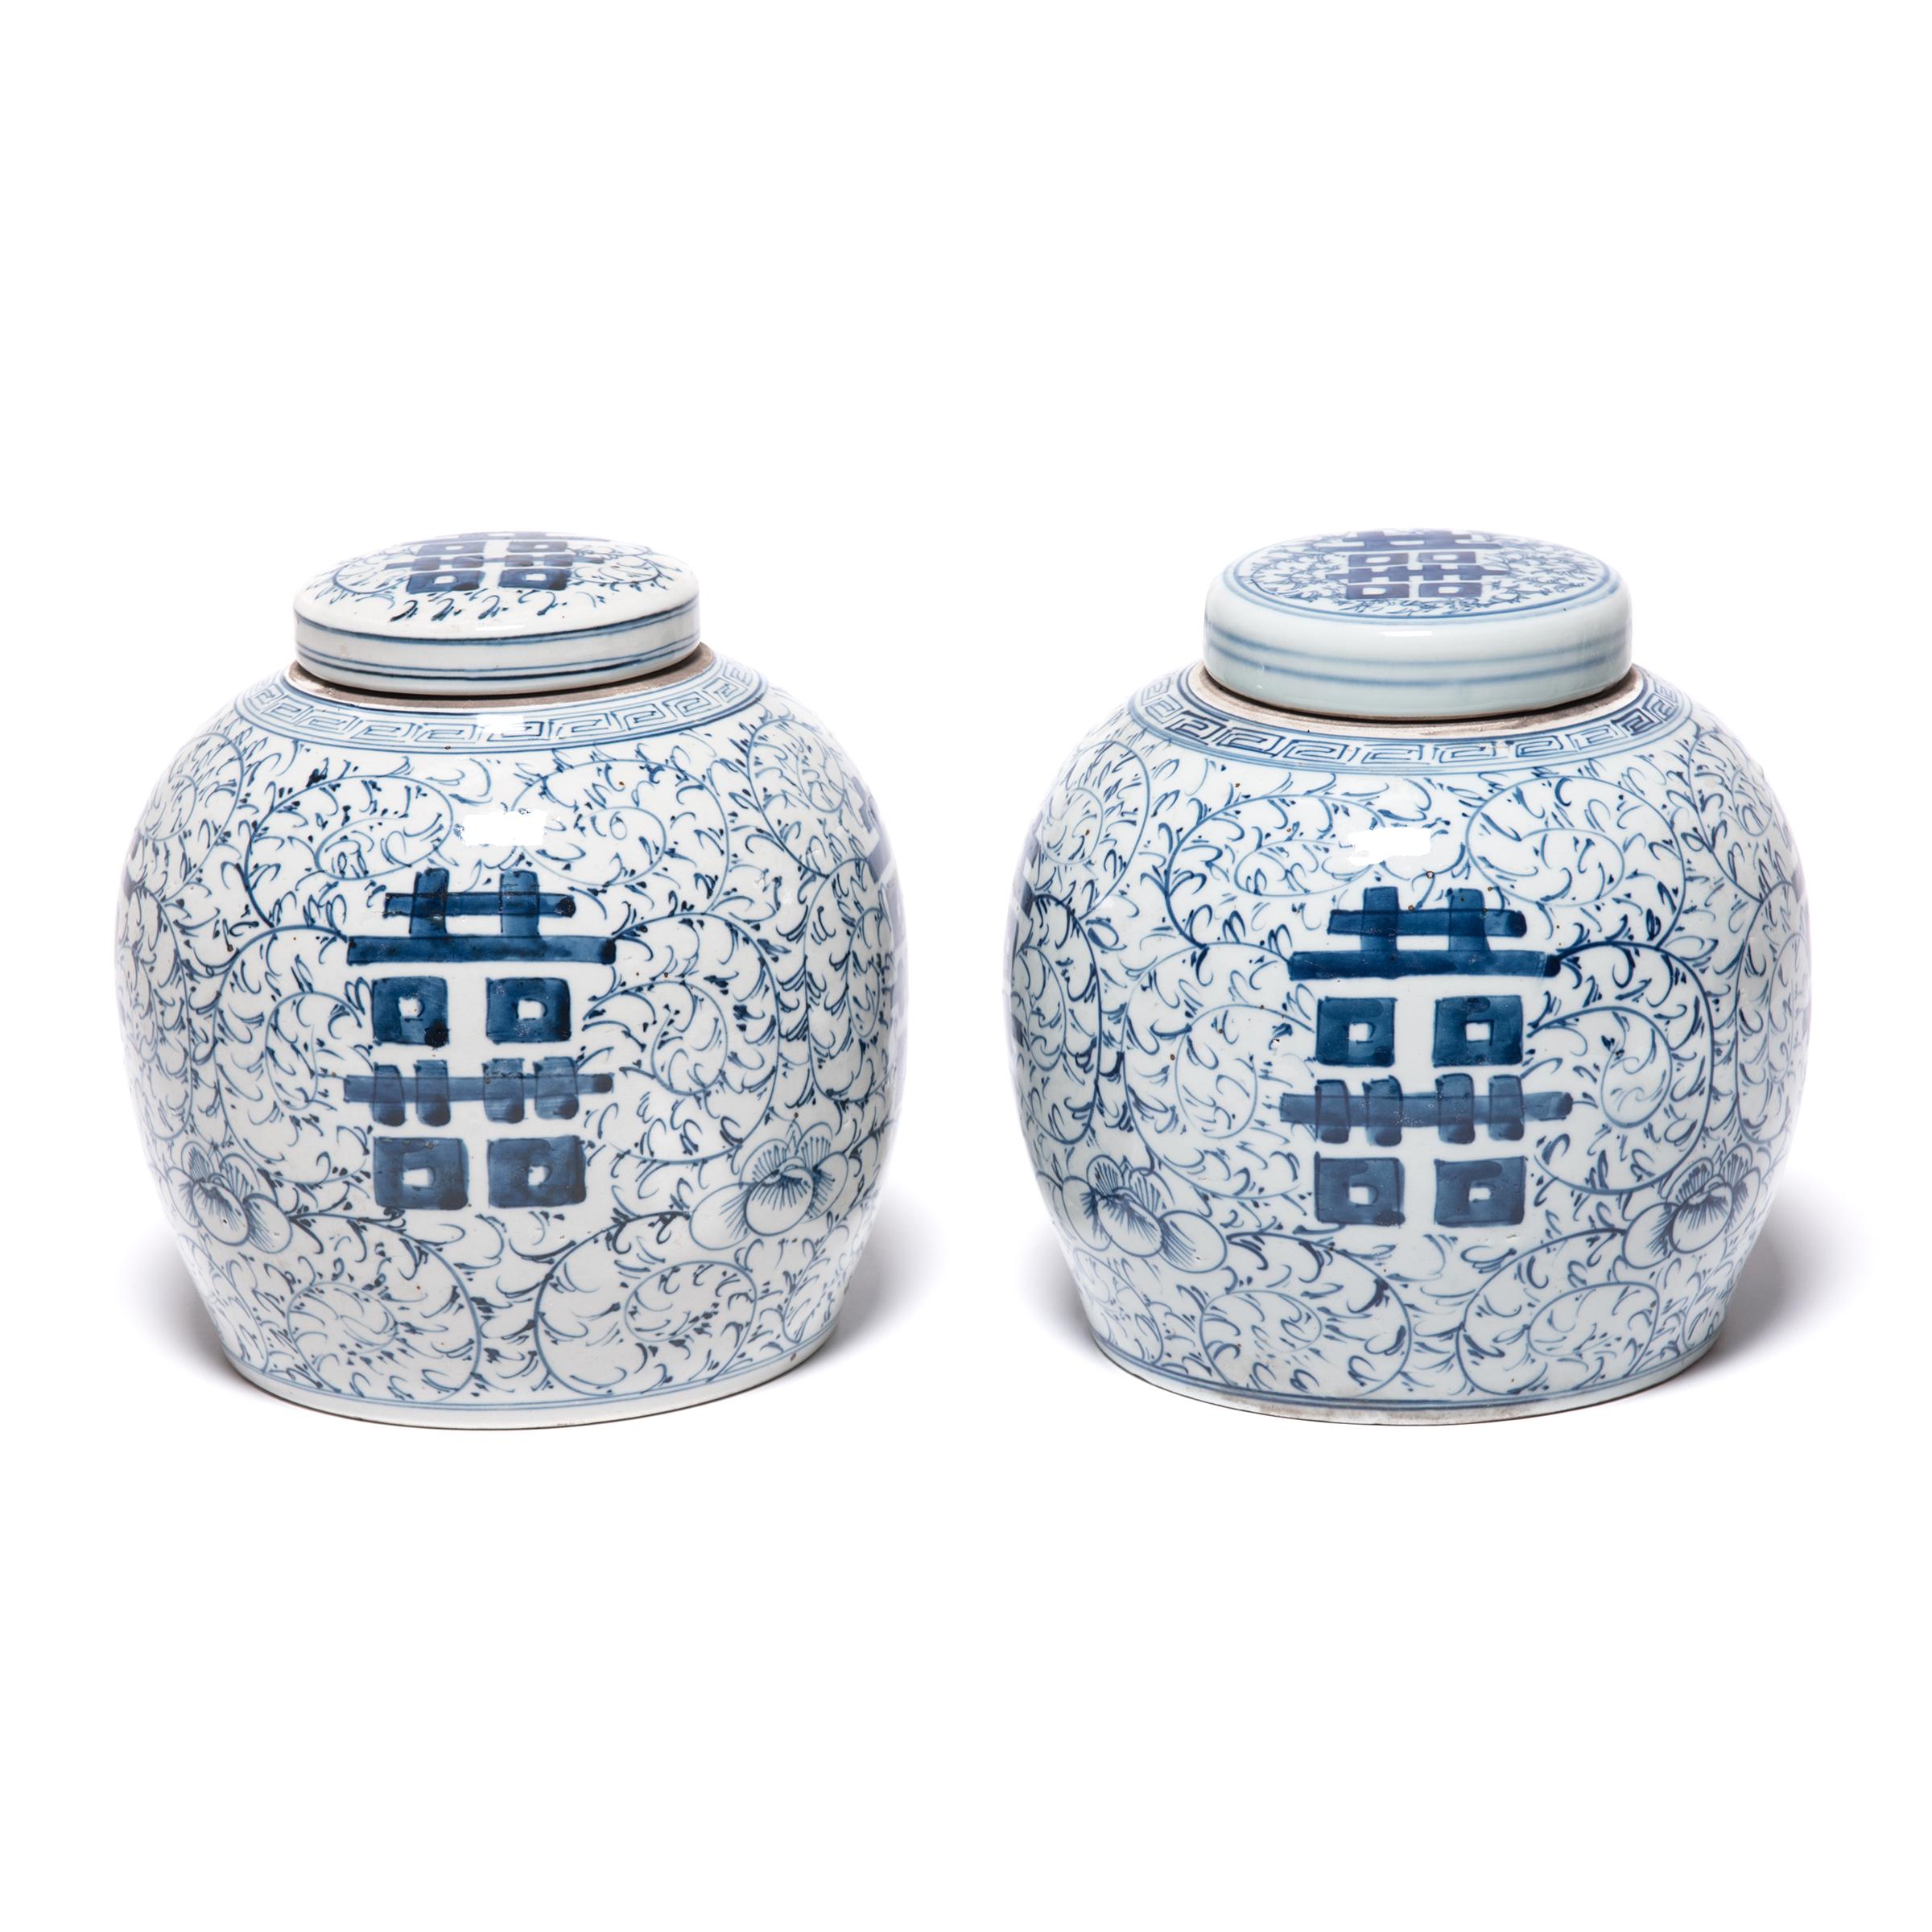 Porcelain Chinese Blue and White Double Happiness Ginger Jar, circa 1900